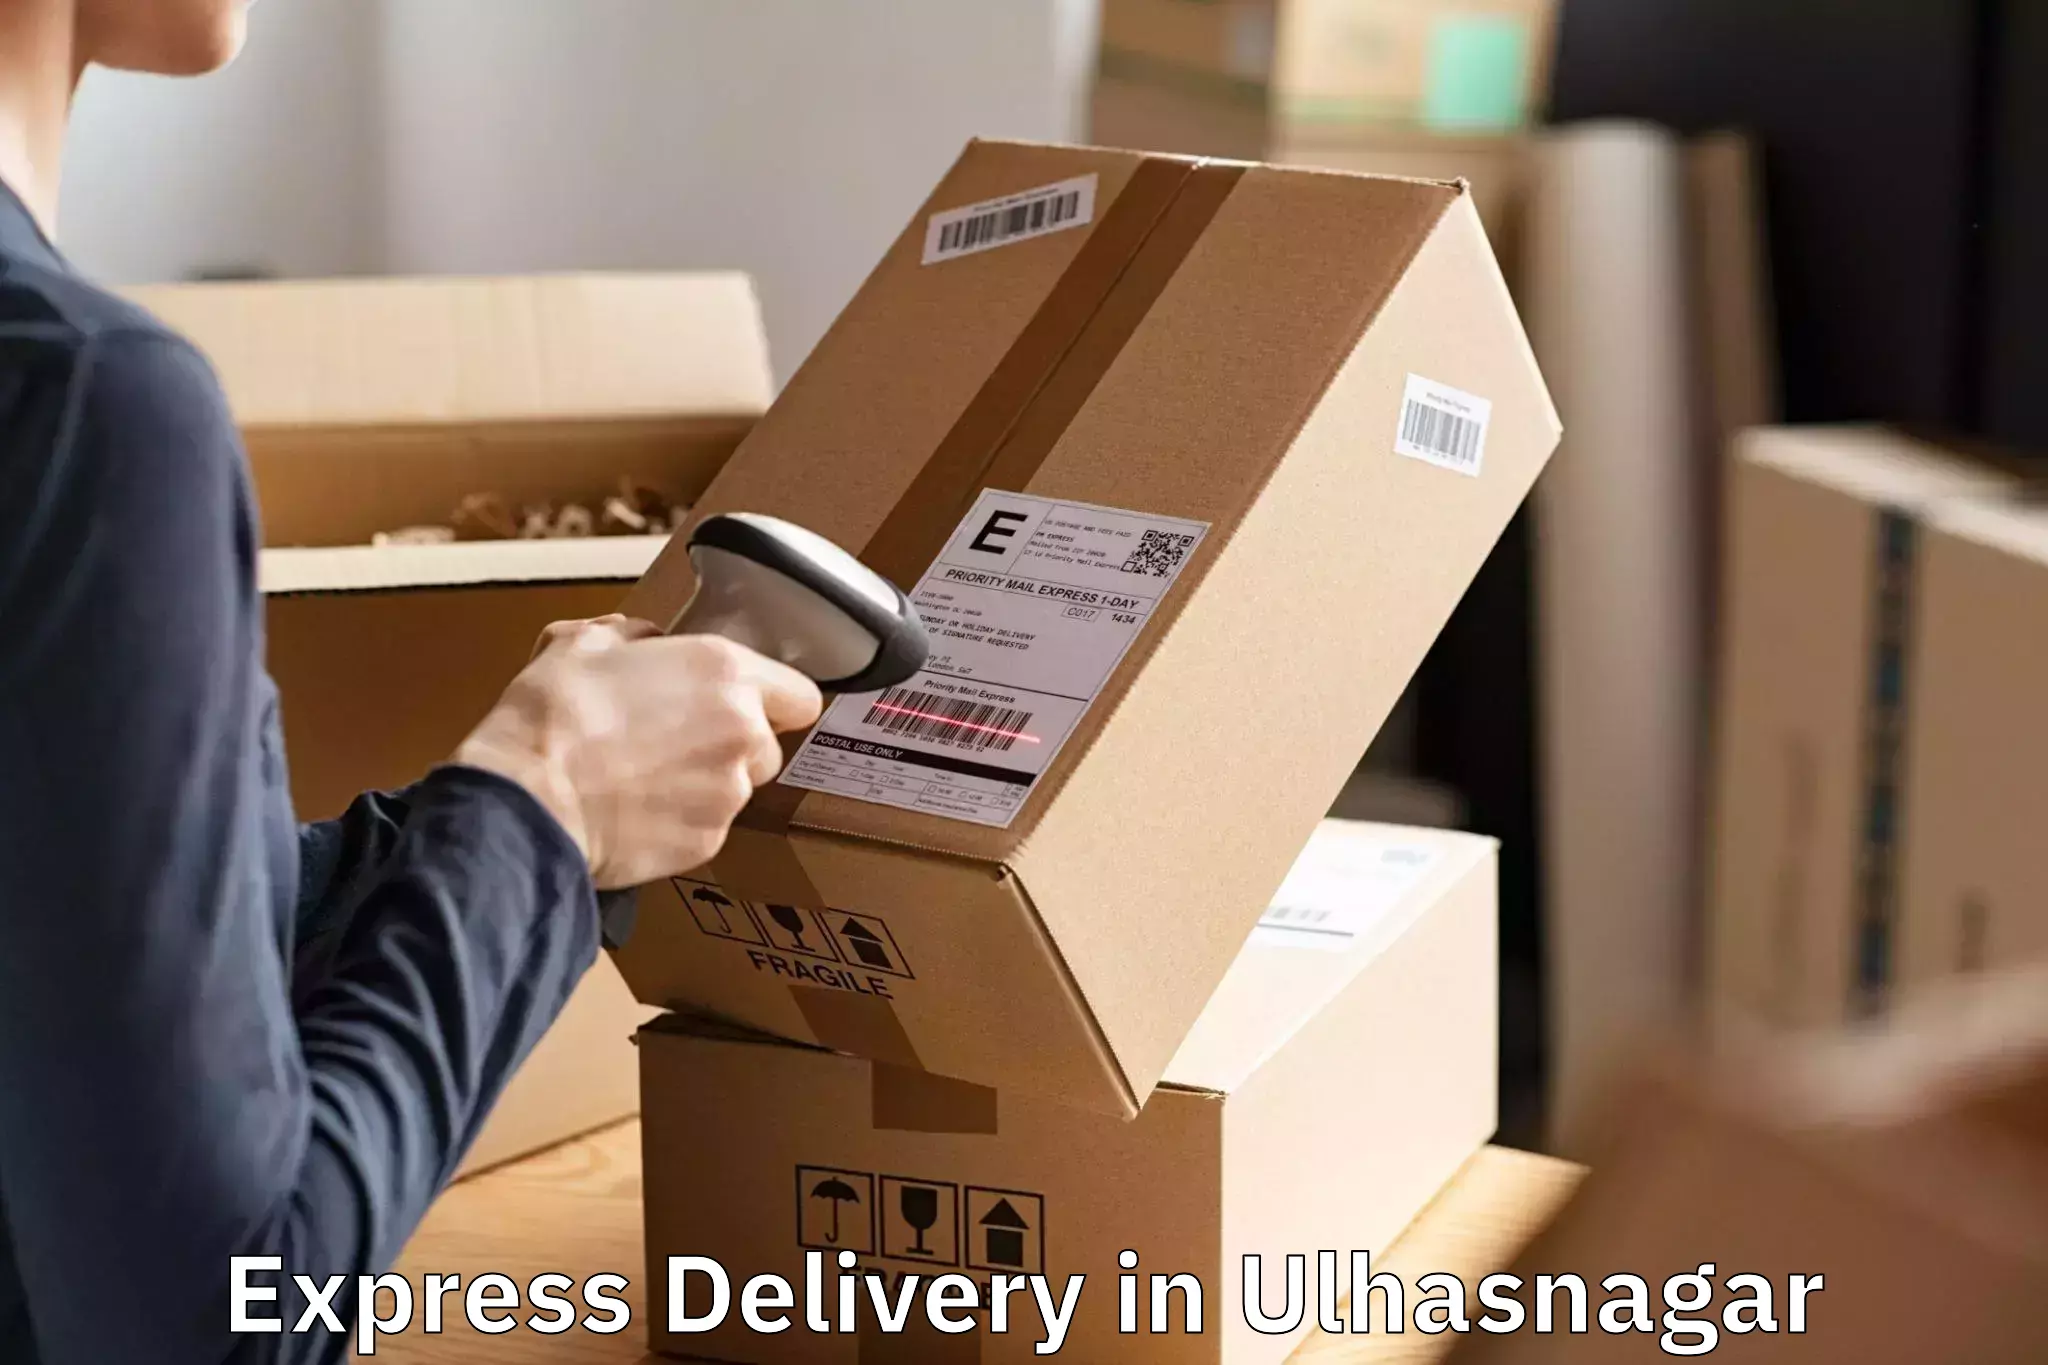 Top Express Delivery Available in Ulhasnagar, Maharashtra (MH)